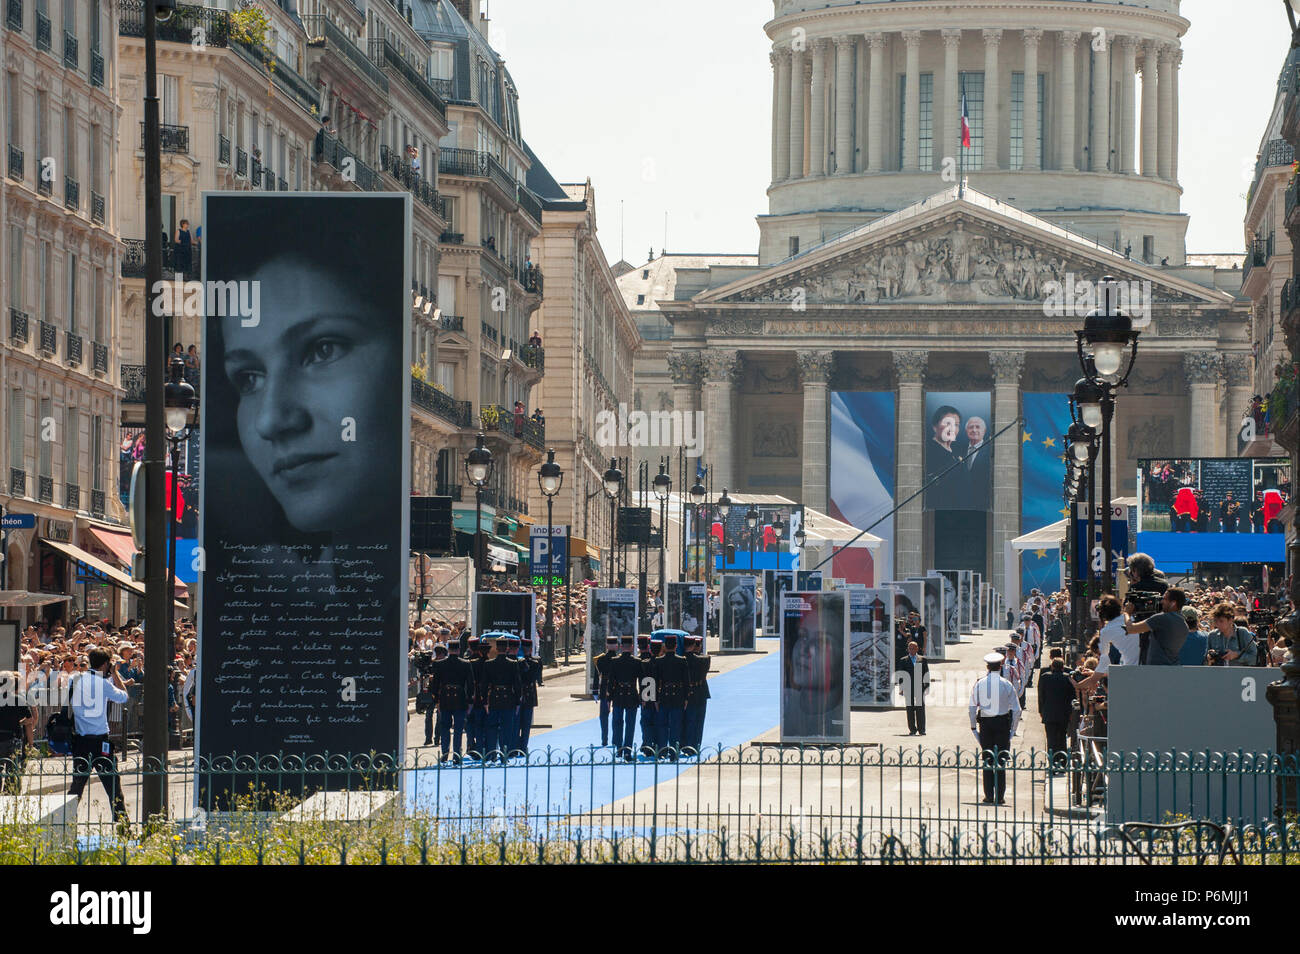 A view of the entrance to the Pantheon during the burial ceremony. Burial ceremony at the Pantheon of former French politician and Holocaust survivor Simone Veil and her husband Antoine Veil in Paris. Former Health Minister, Simone Veil, who passed away on June 30, 2017 became president of the European Parliament and one of France's most revered politicians by advocating the 1975 law legalizing abortion in France. Stock Photo